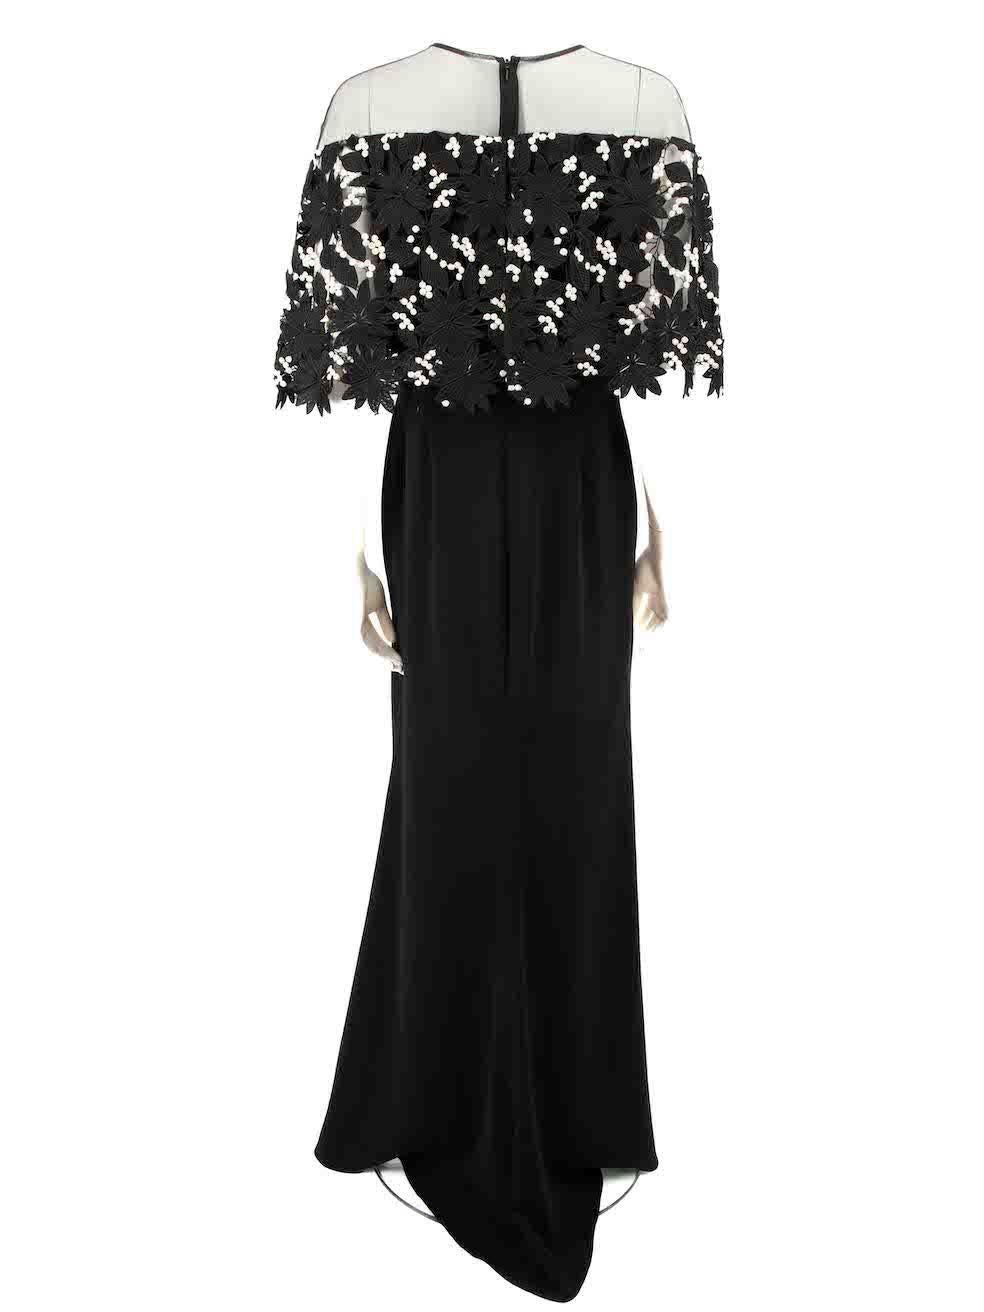 Lela Rose Black Floral Lace Panel Maxi Dress Size XXL In Good Condition For Sale In London, GB